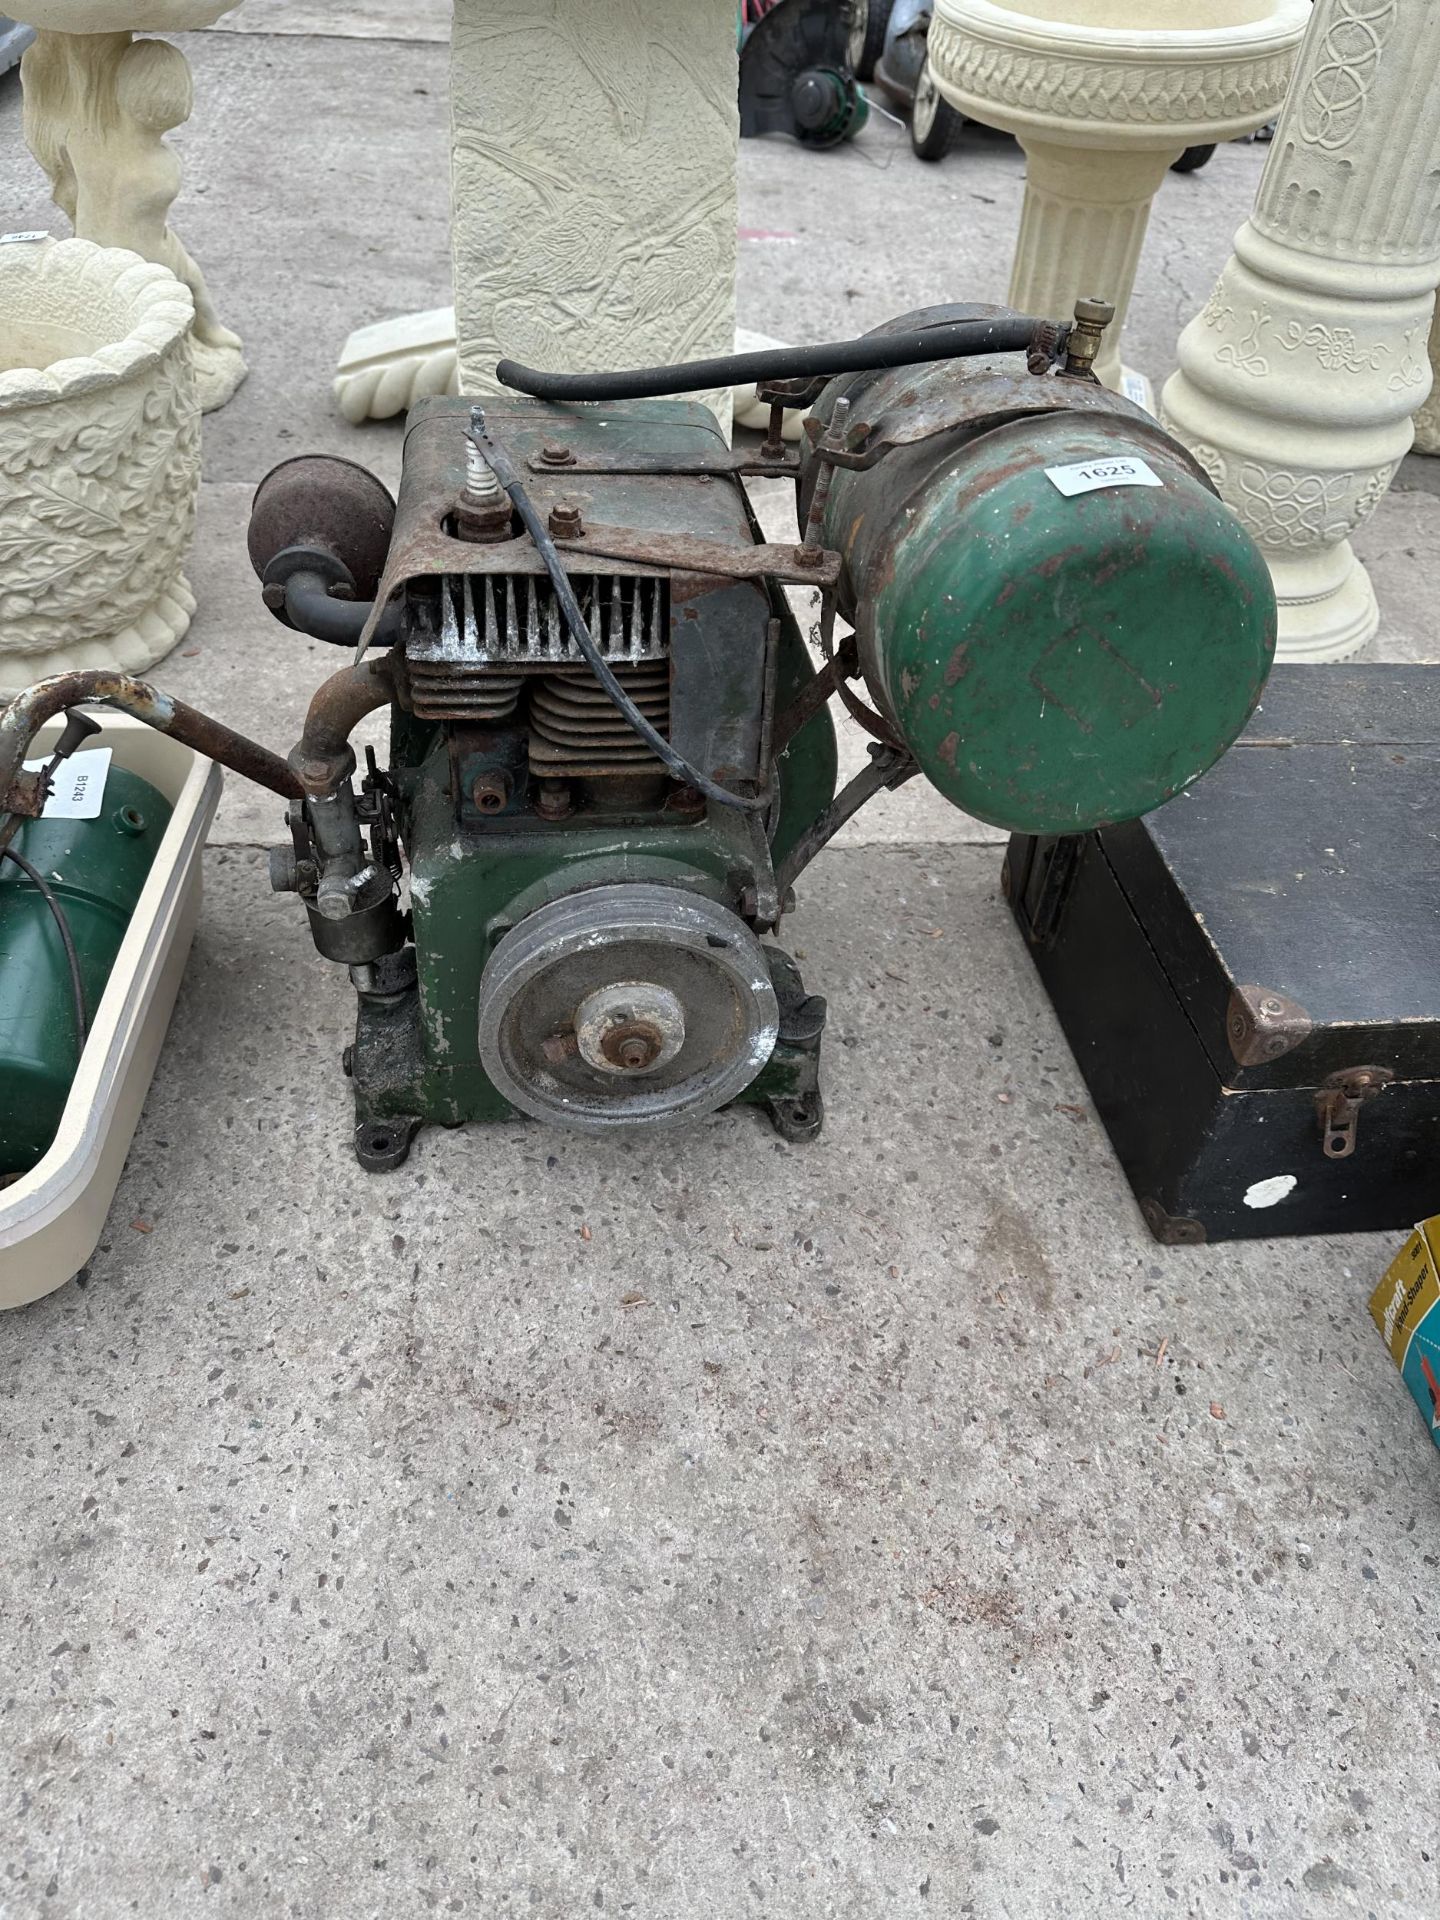 A VINTAGE VILLIERS TWO STROKE ENGINE